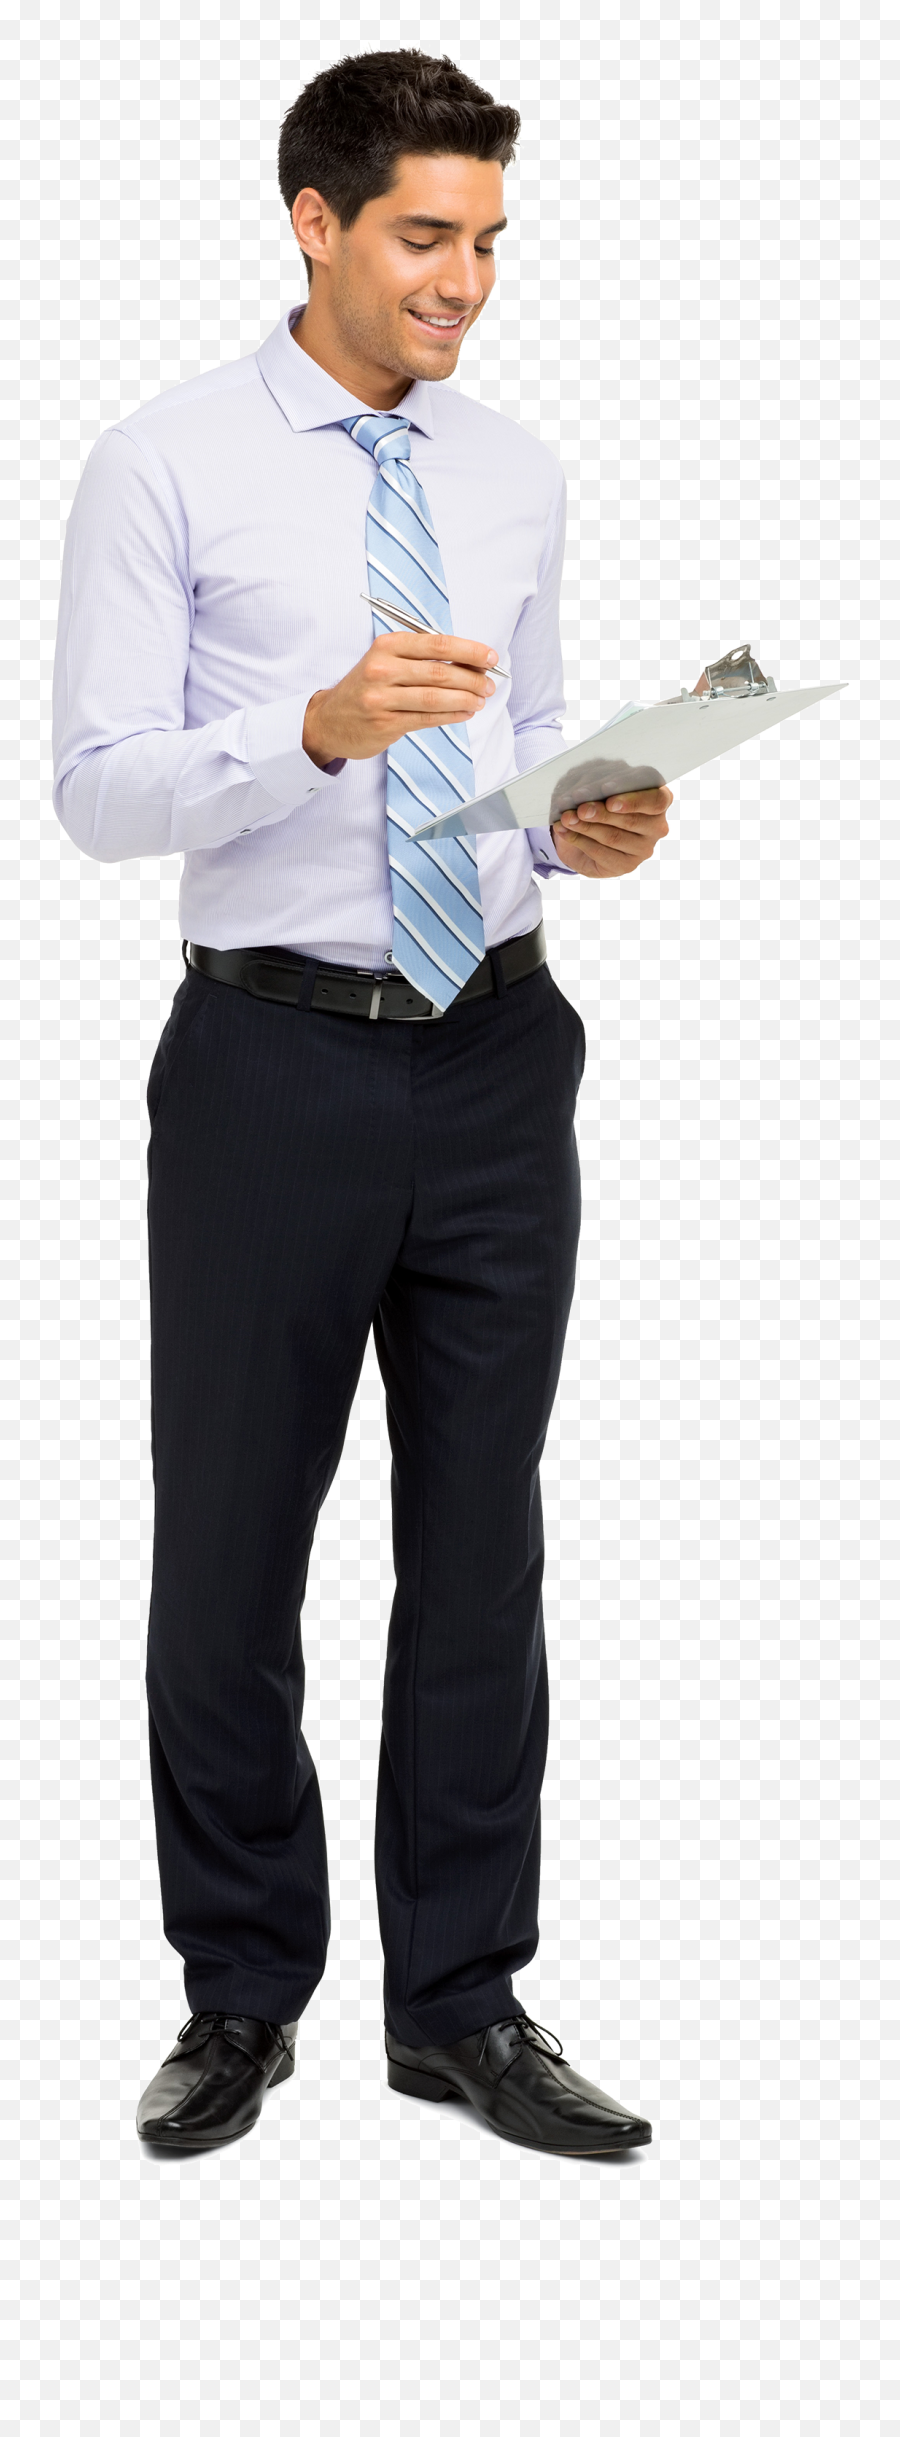 Man With Clipboard Png - Formal Wear,Clipboard Png